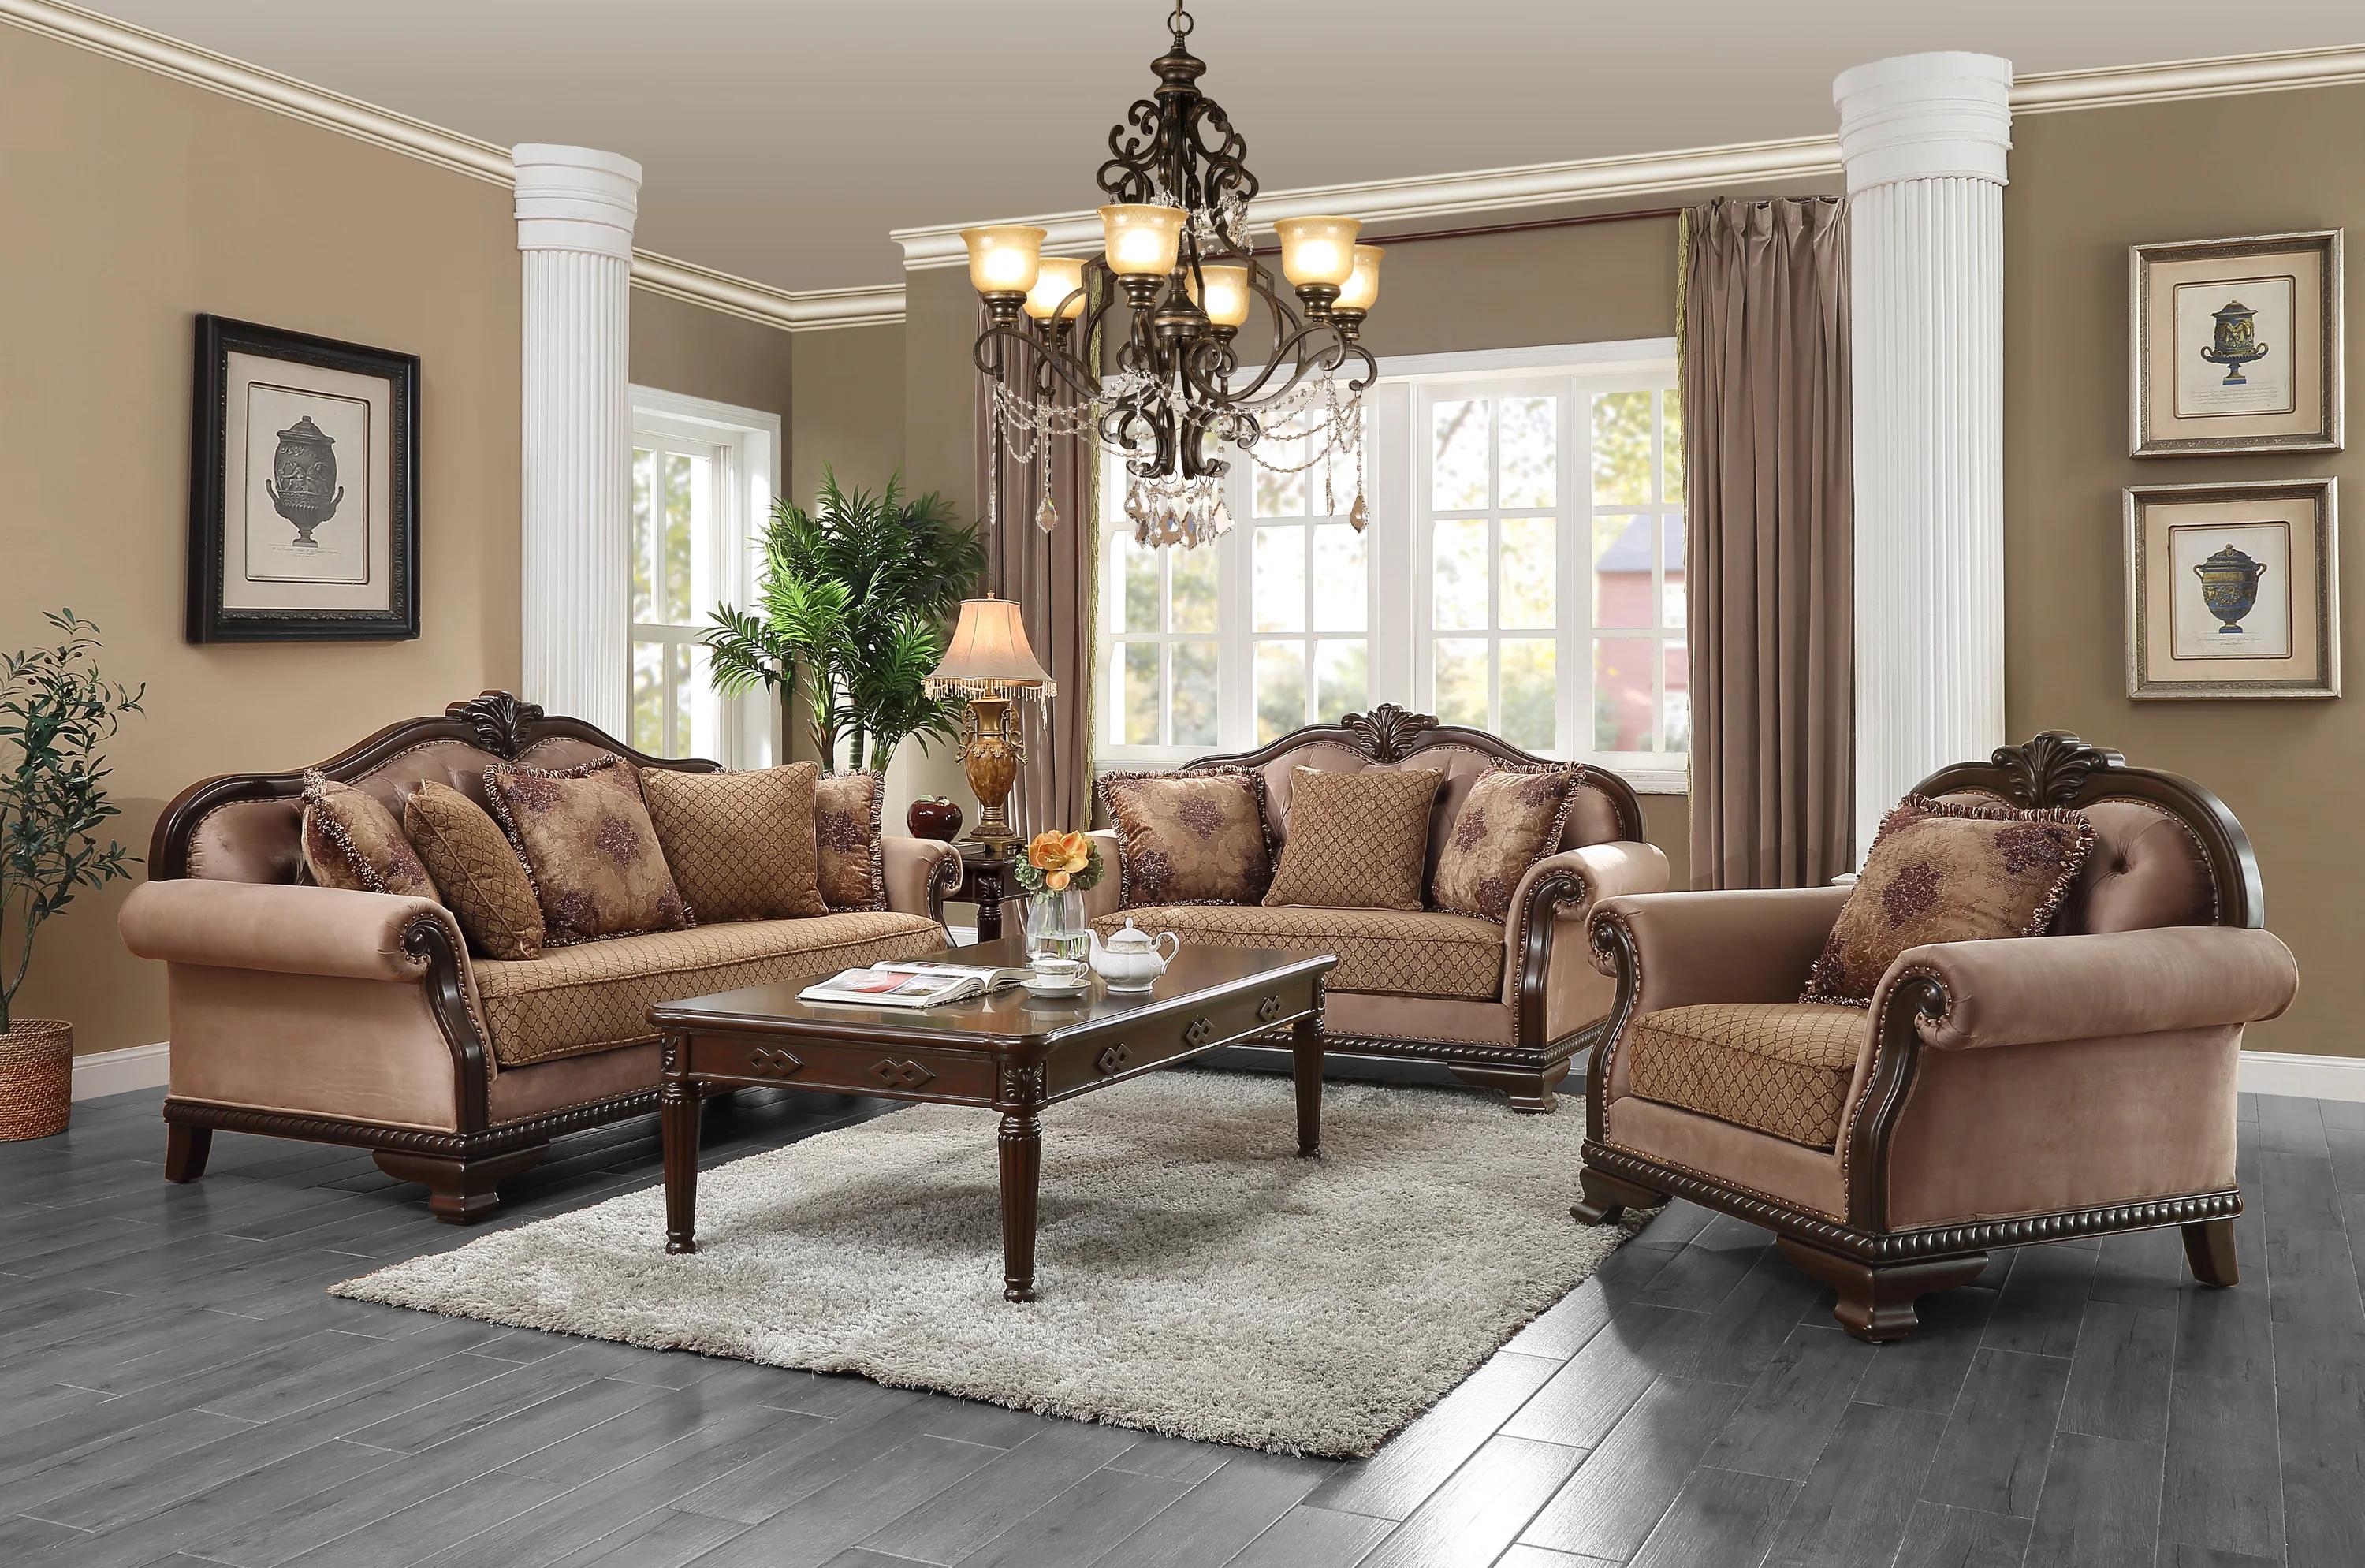 

                    
Acme Furniture Chateau De Ville Sofa Loveseat Chair and Coffee Table Tan Fabric Purchase 
